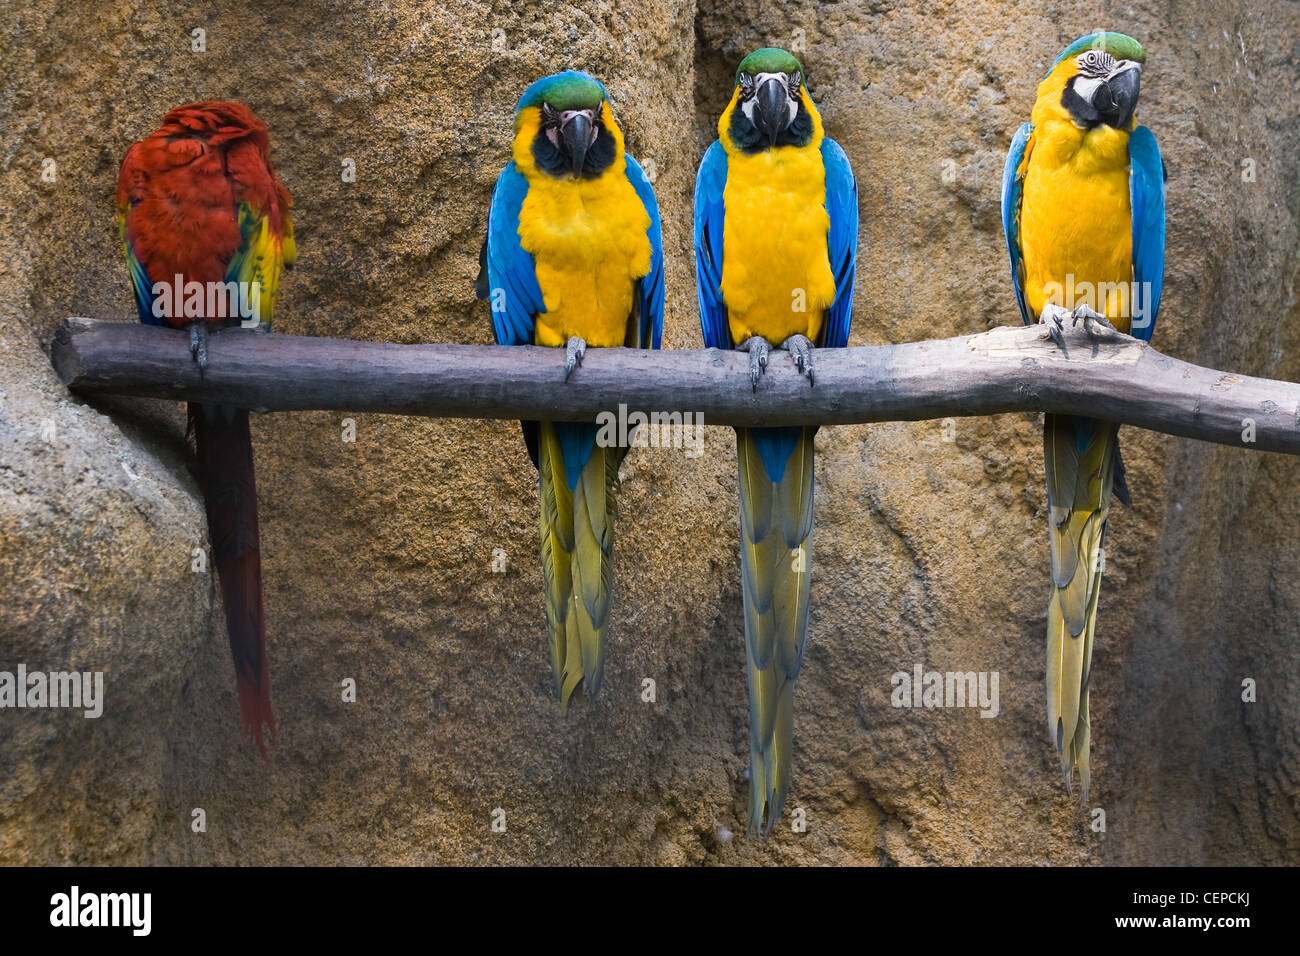 Three yellow and blue parrots in row and one with different colors Stock Photo